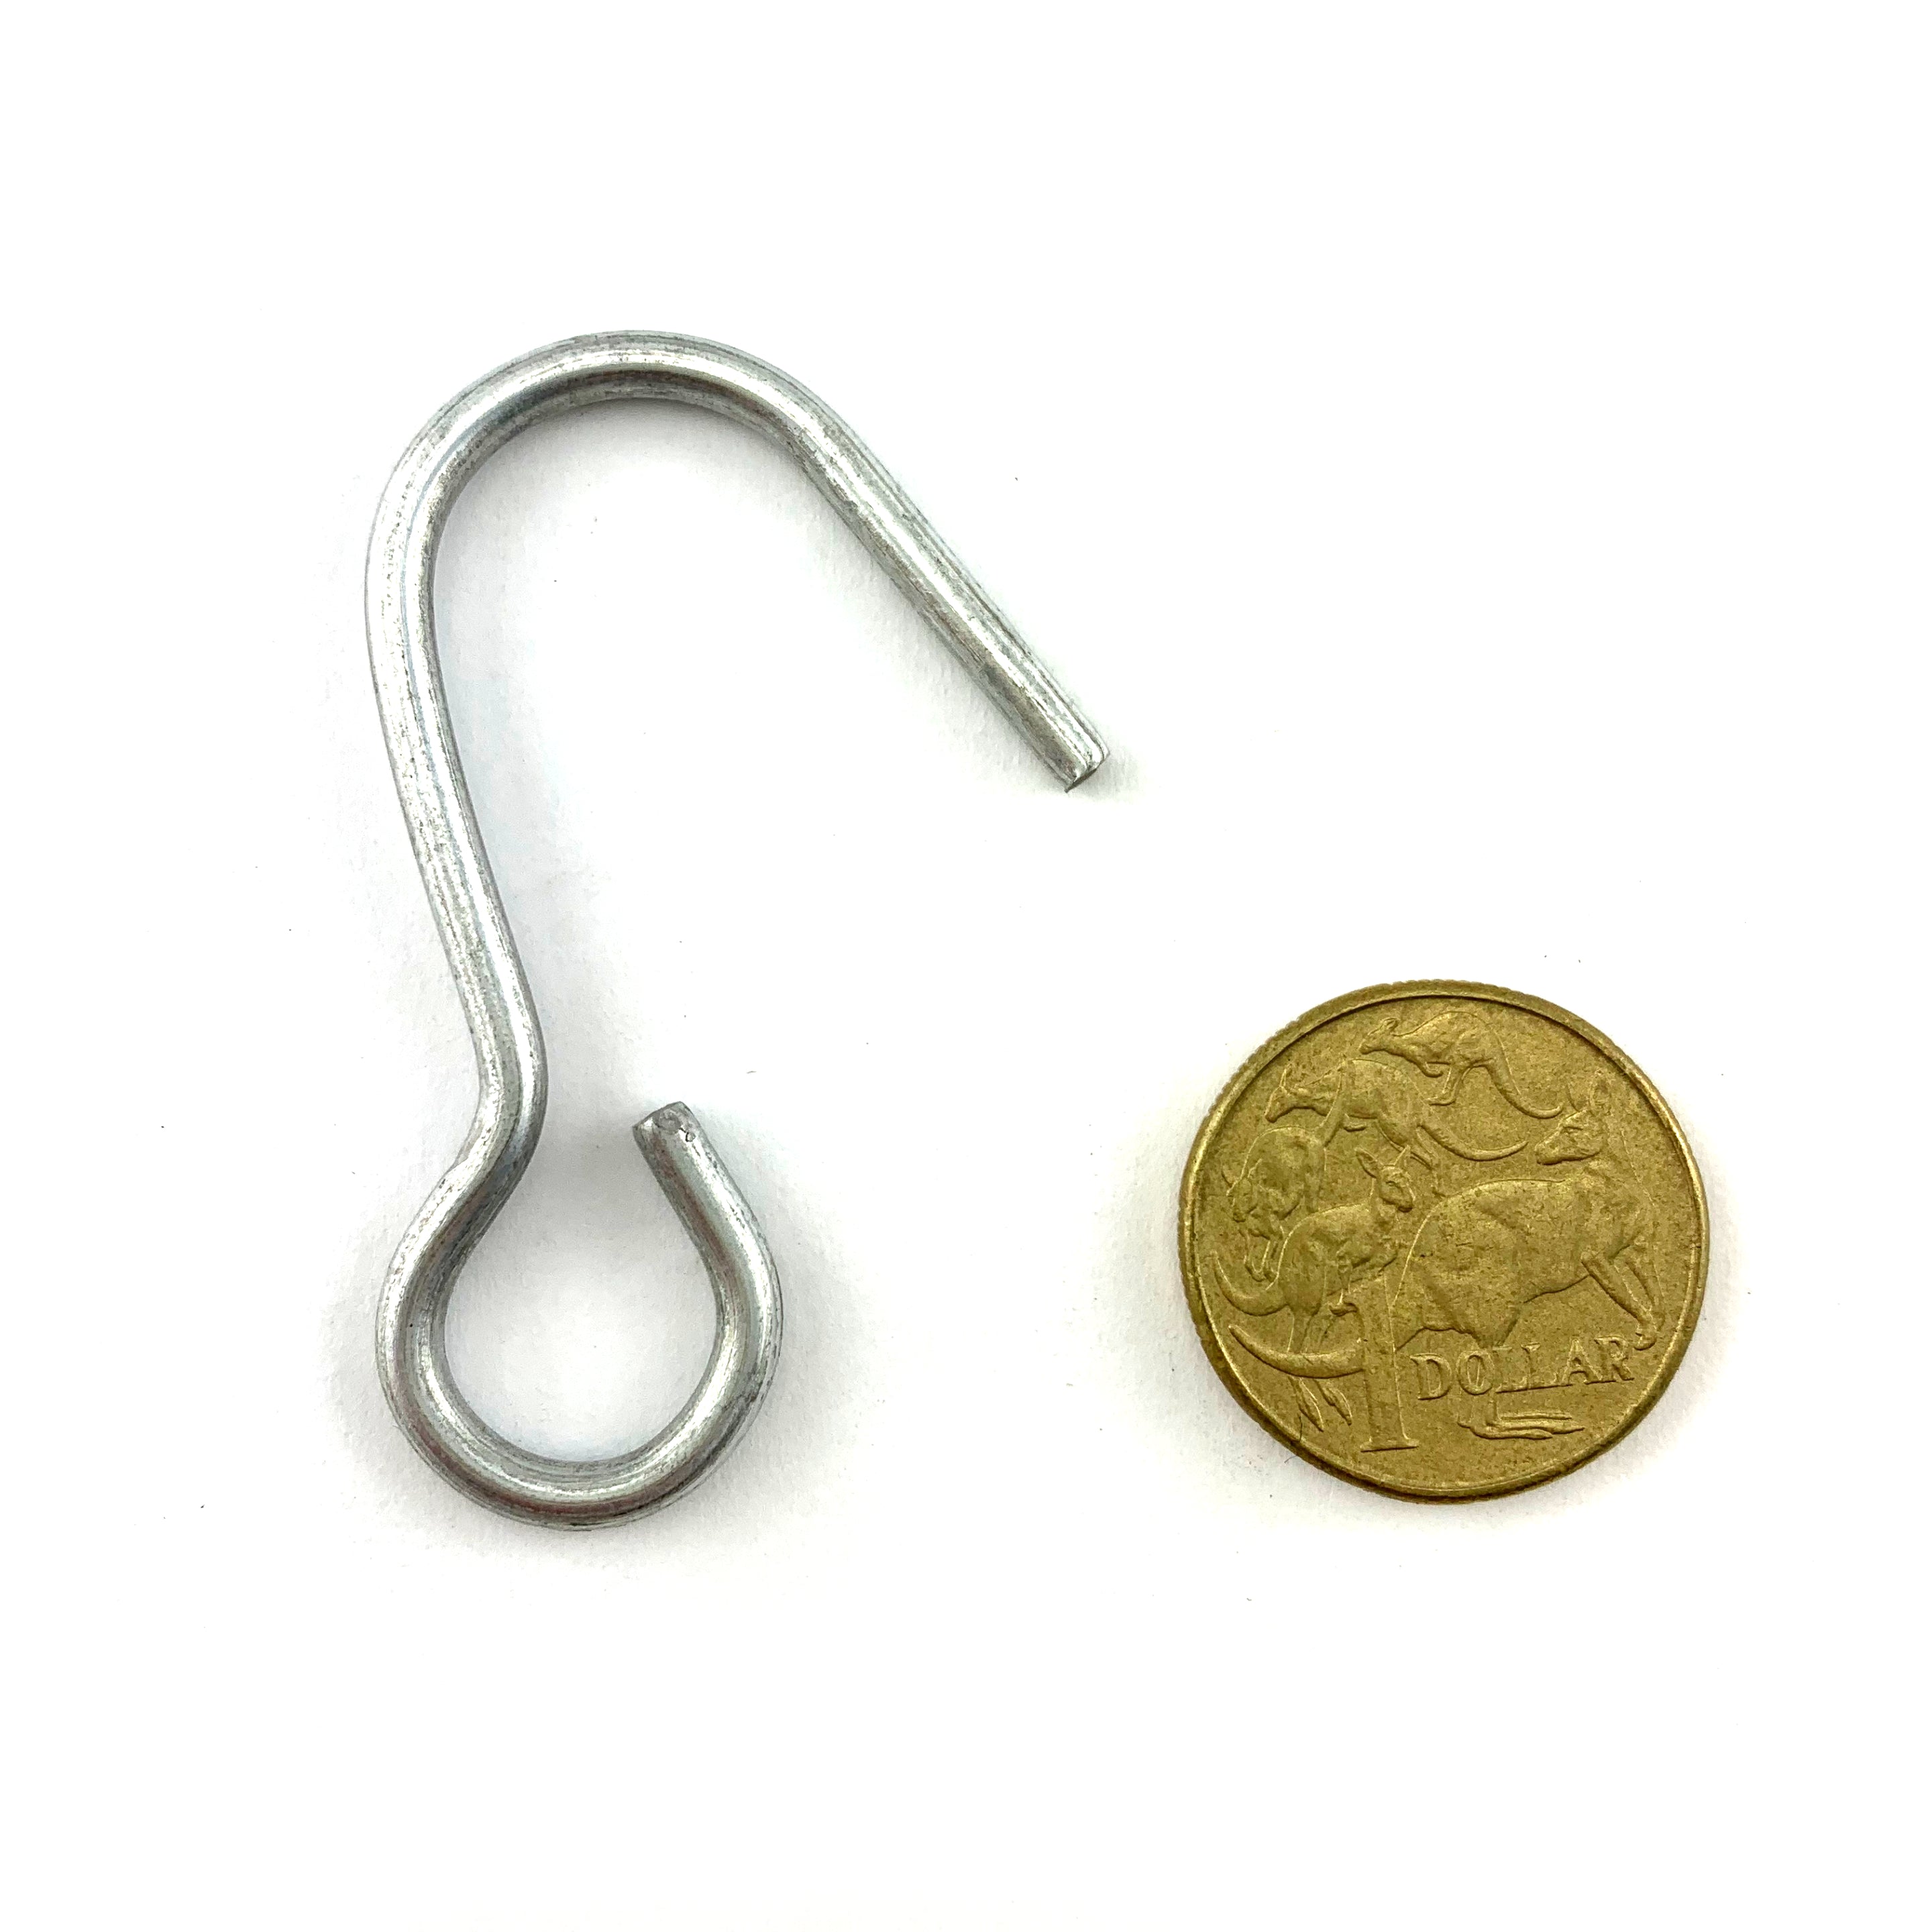 Wire G Hooks - Bag of 100. Australian made. Australia wide delivery.